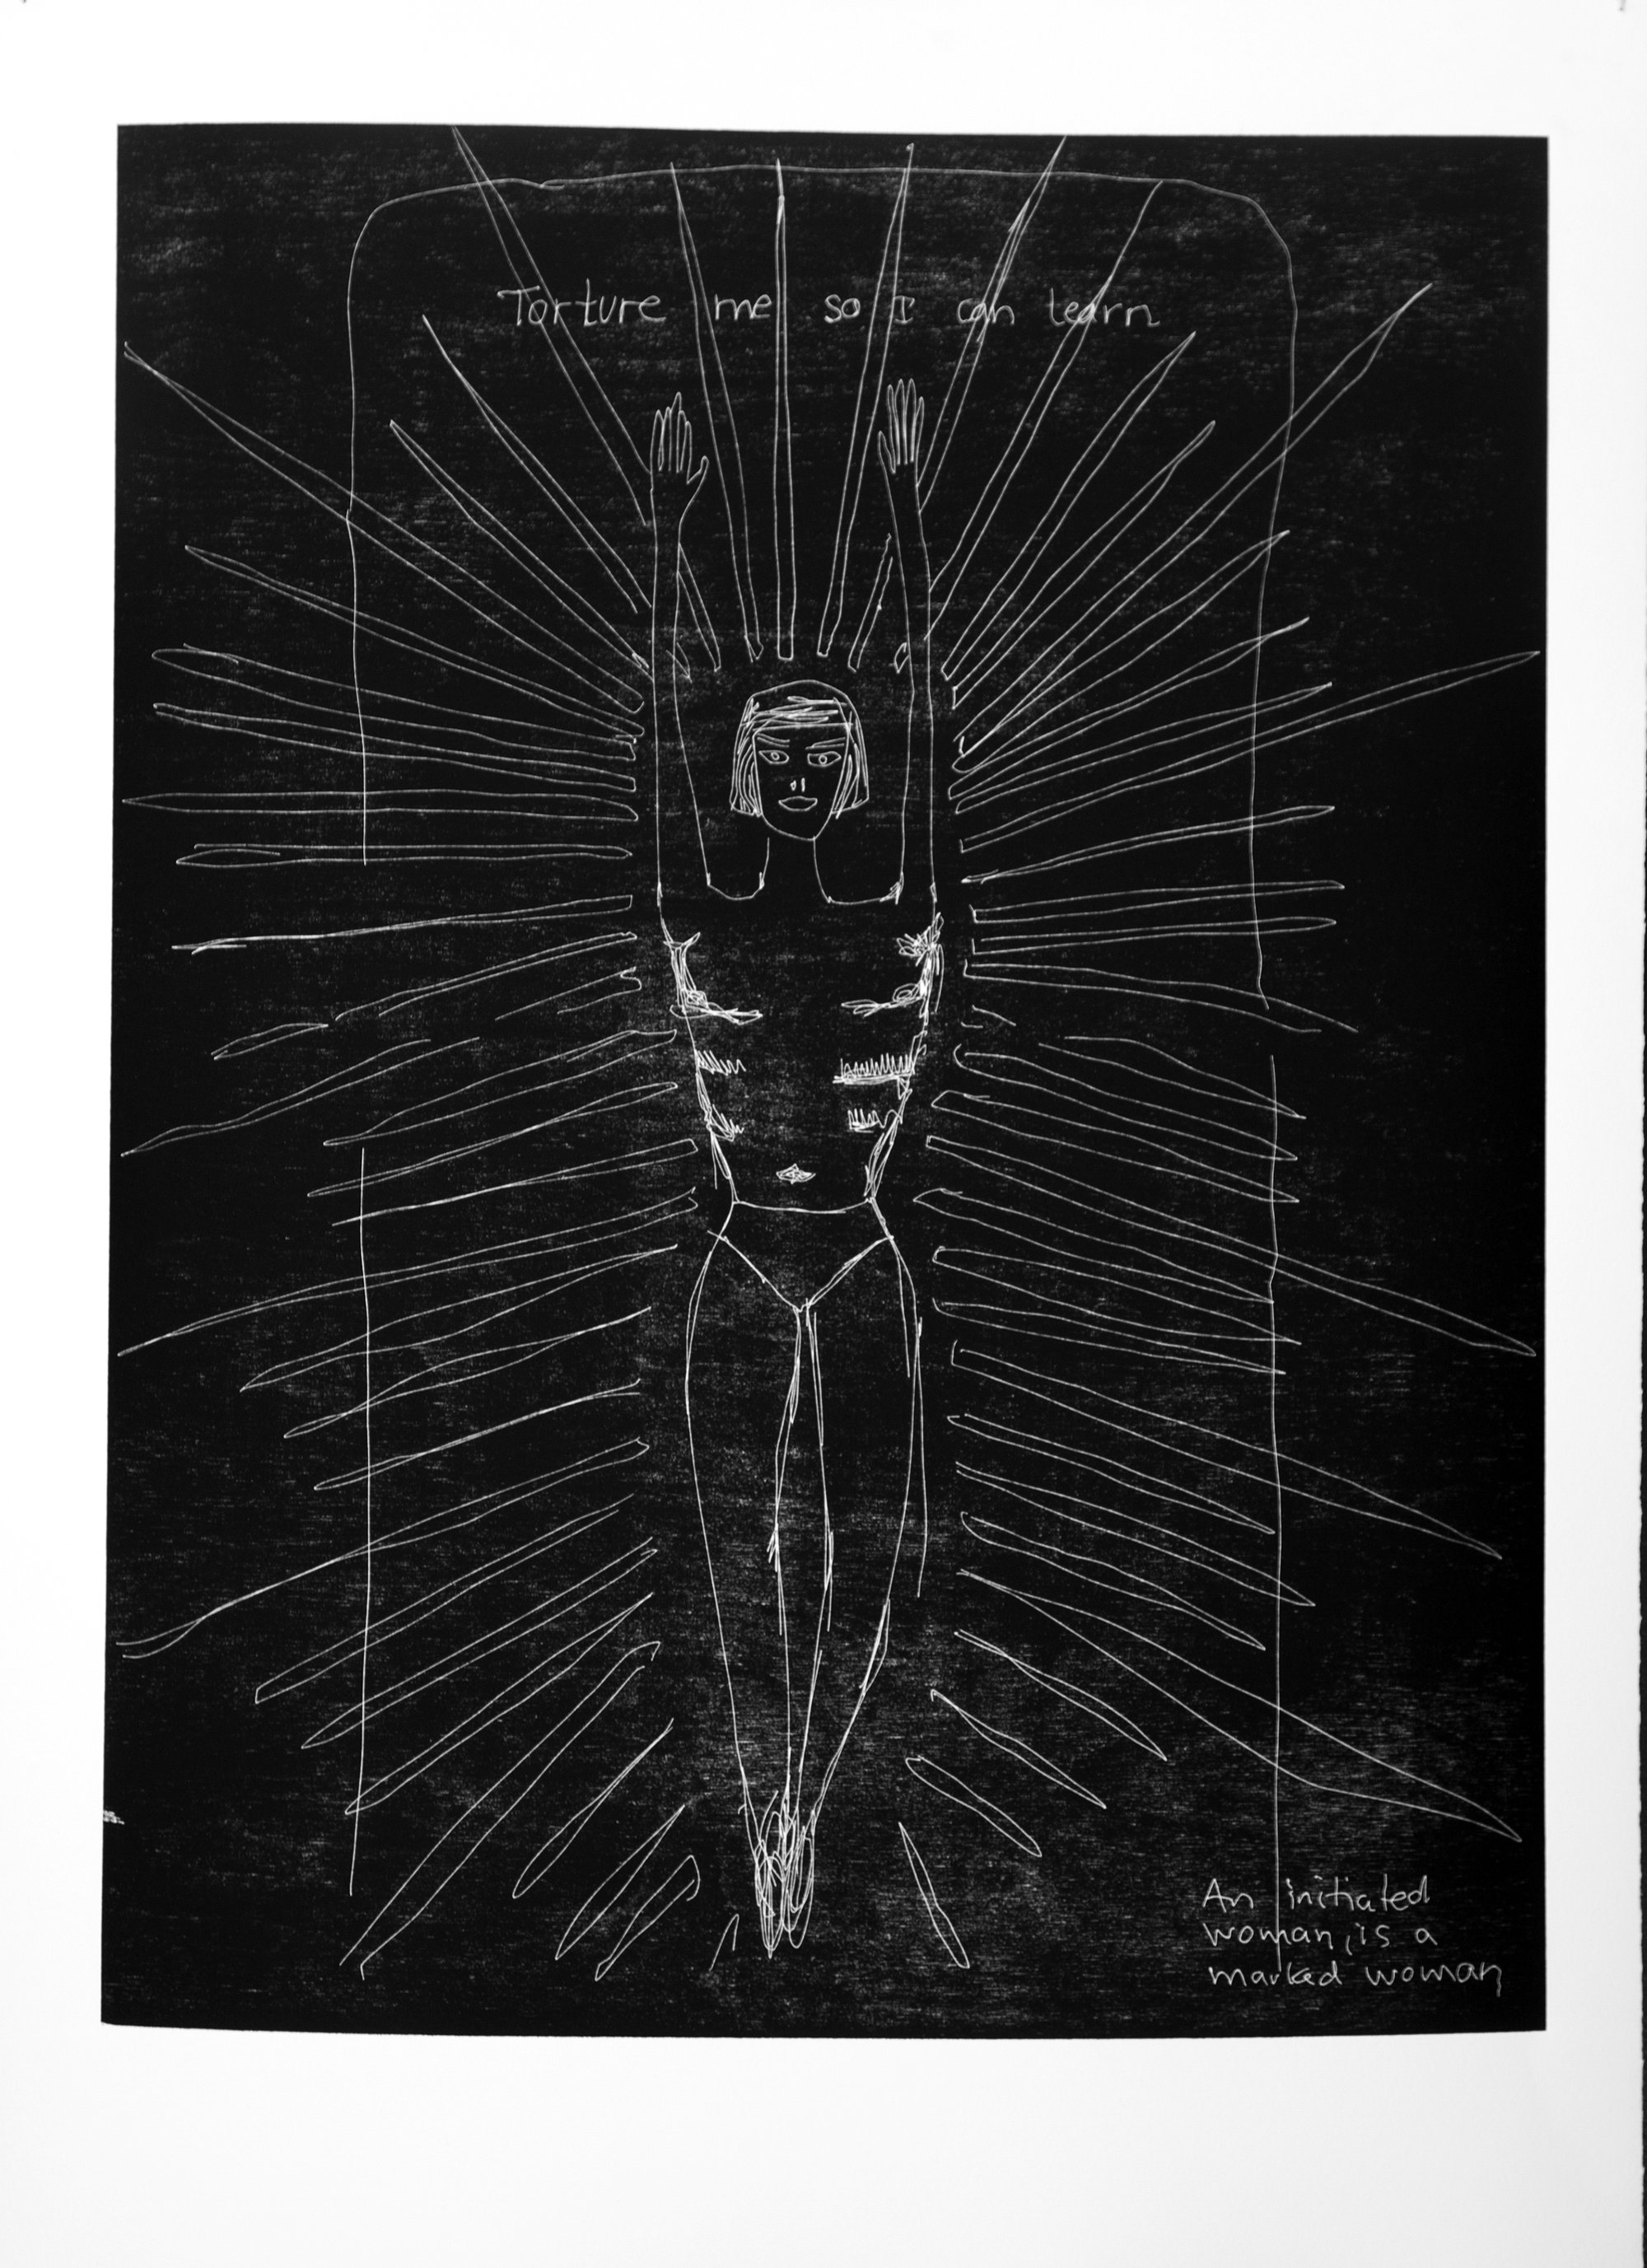 Sidsel Meineche Hansen, Torture me so I can learn miss Ovartaci, laser woodcut on paper, mounted on aluminium under museum glass, 62.8 x 47.9 cm (24 3/4 x 18 7/8 in), 2013